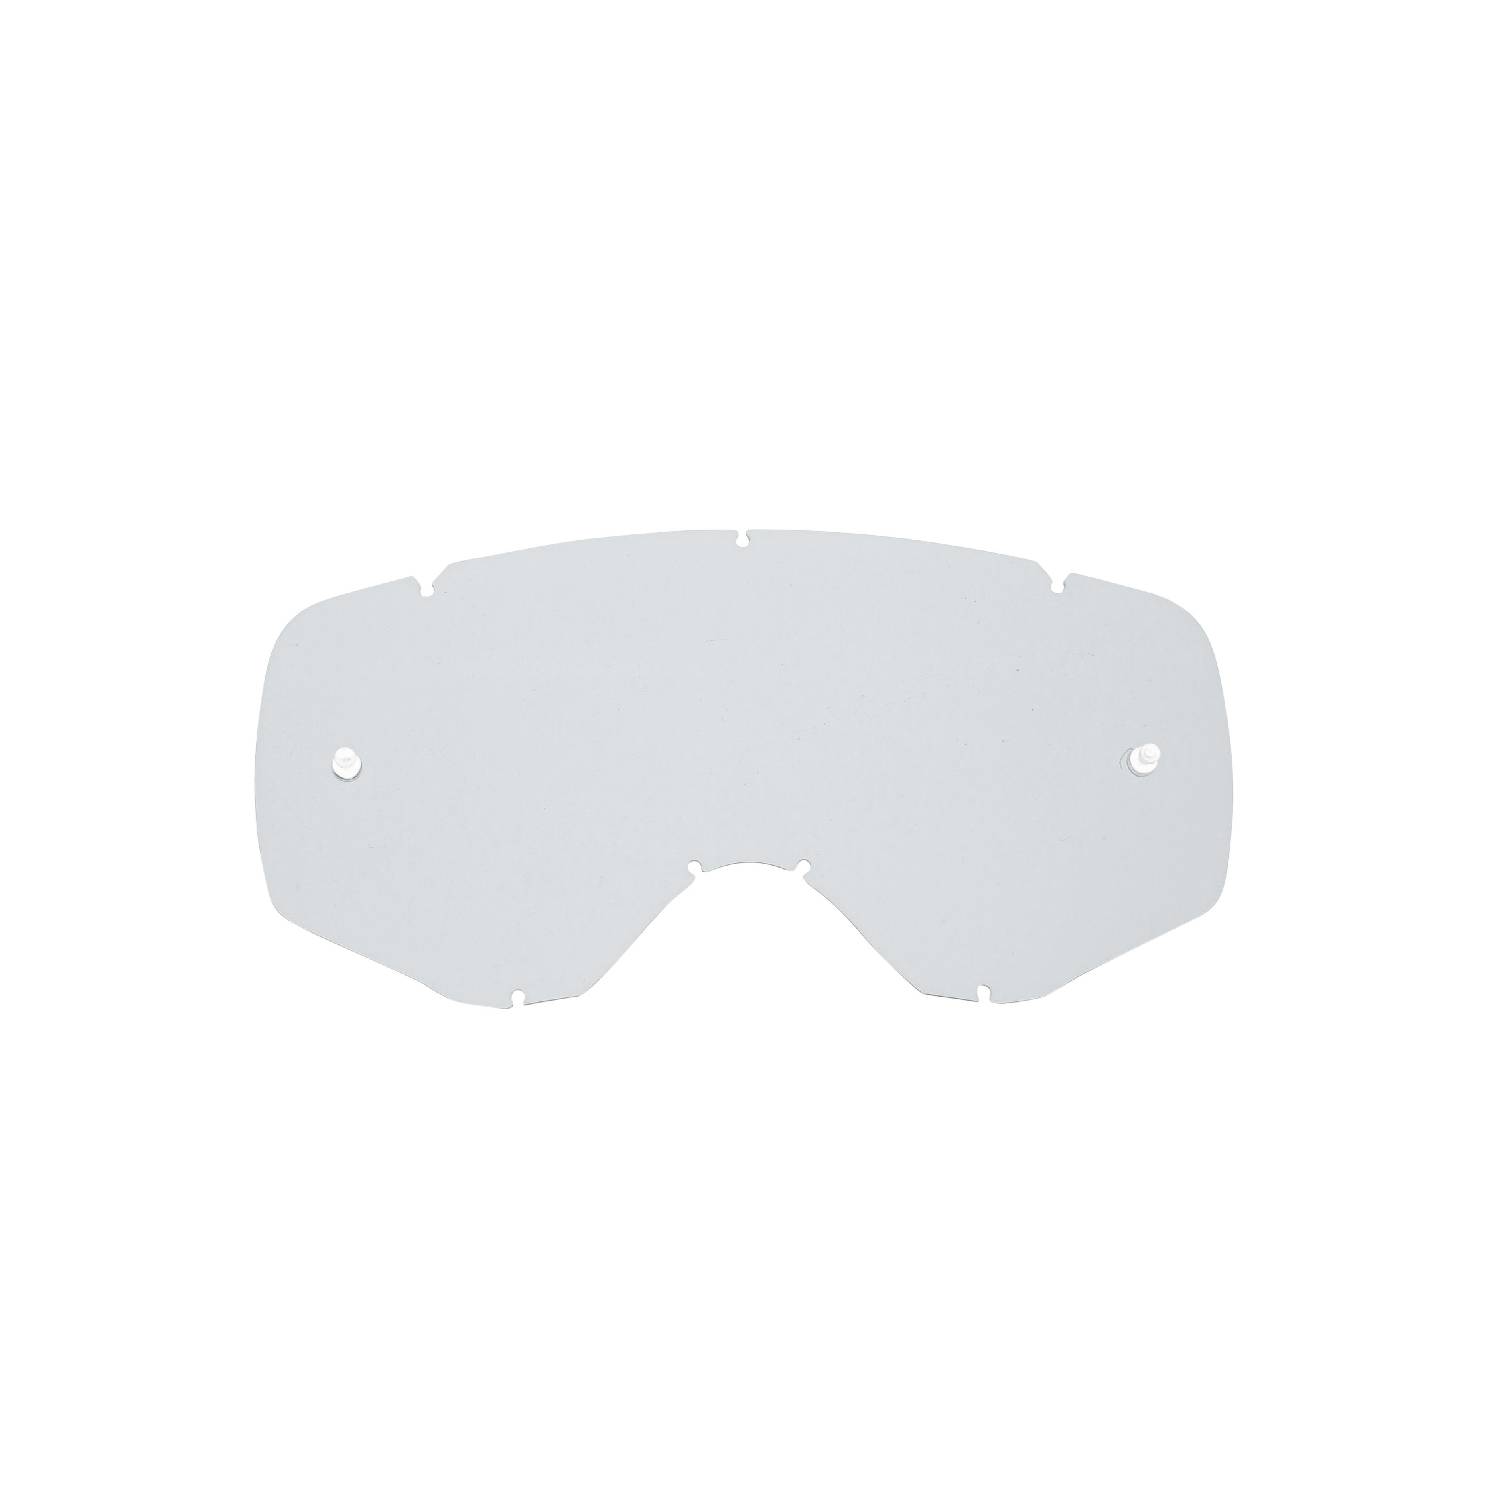 clear replacement lenses for mx goggles compatible for Ethen Zerosei GP/ Basic / Evolution/ Mud Mask goggle